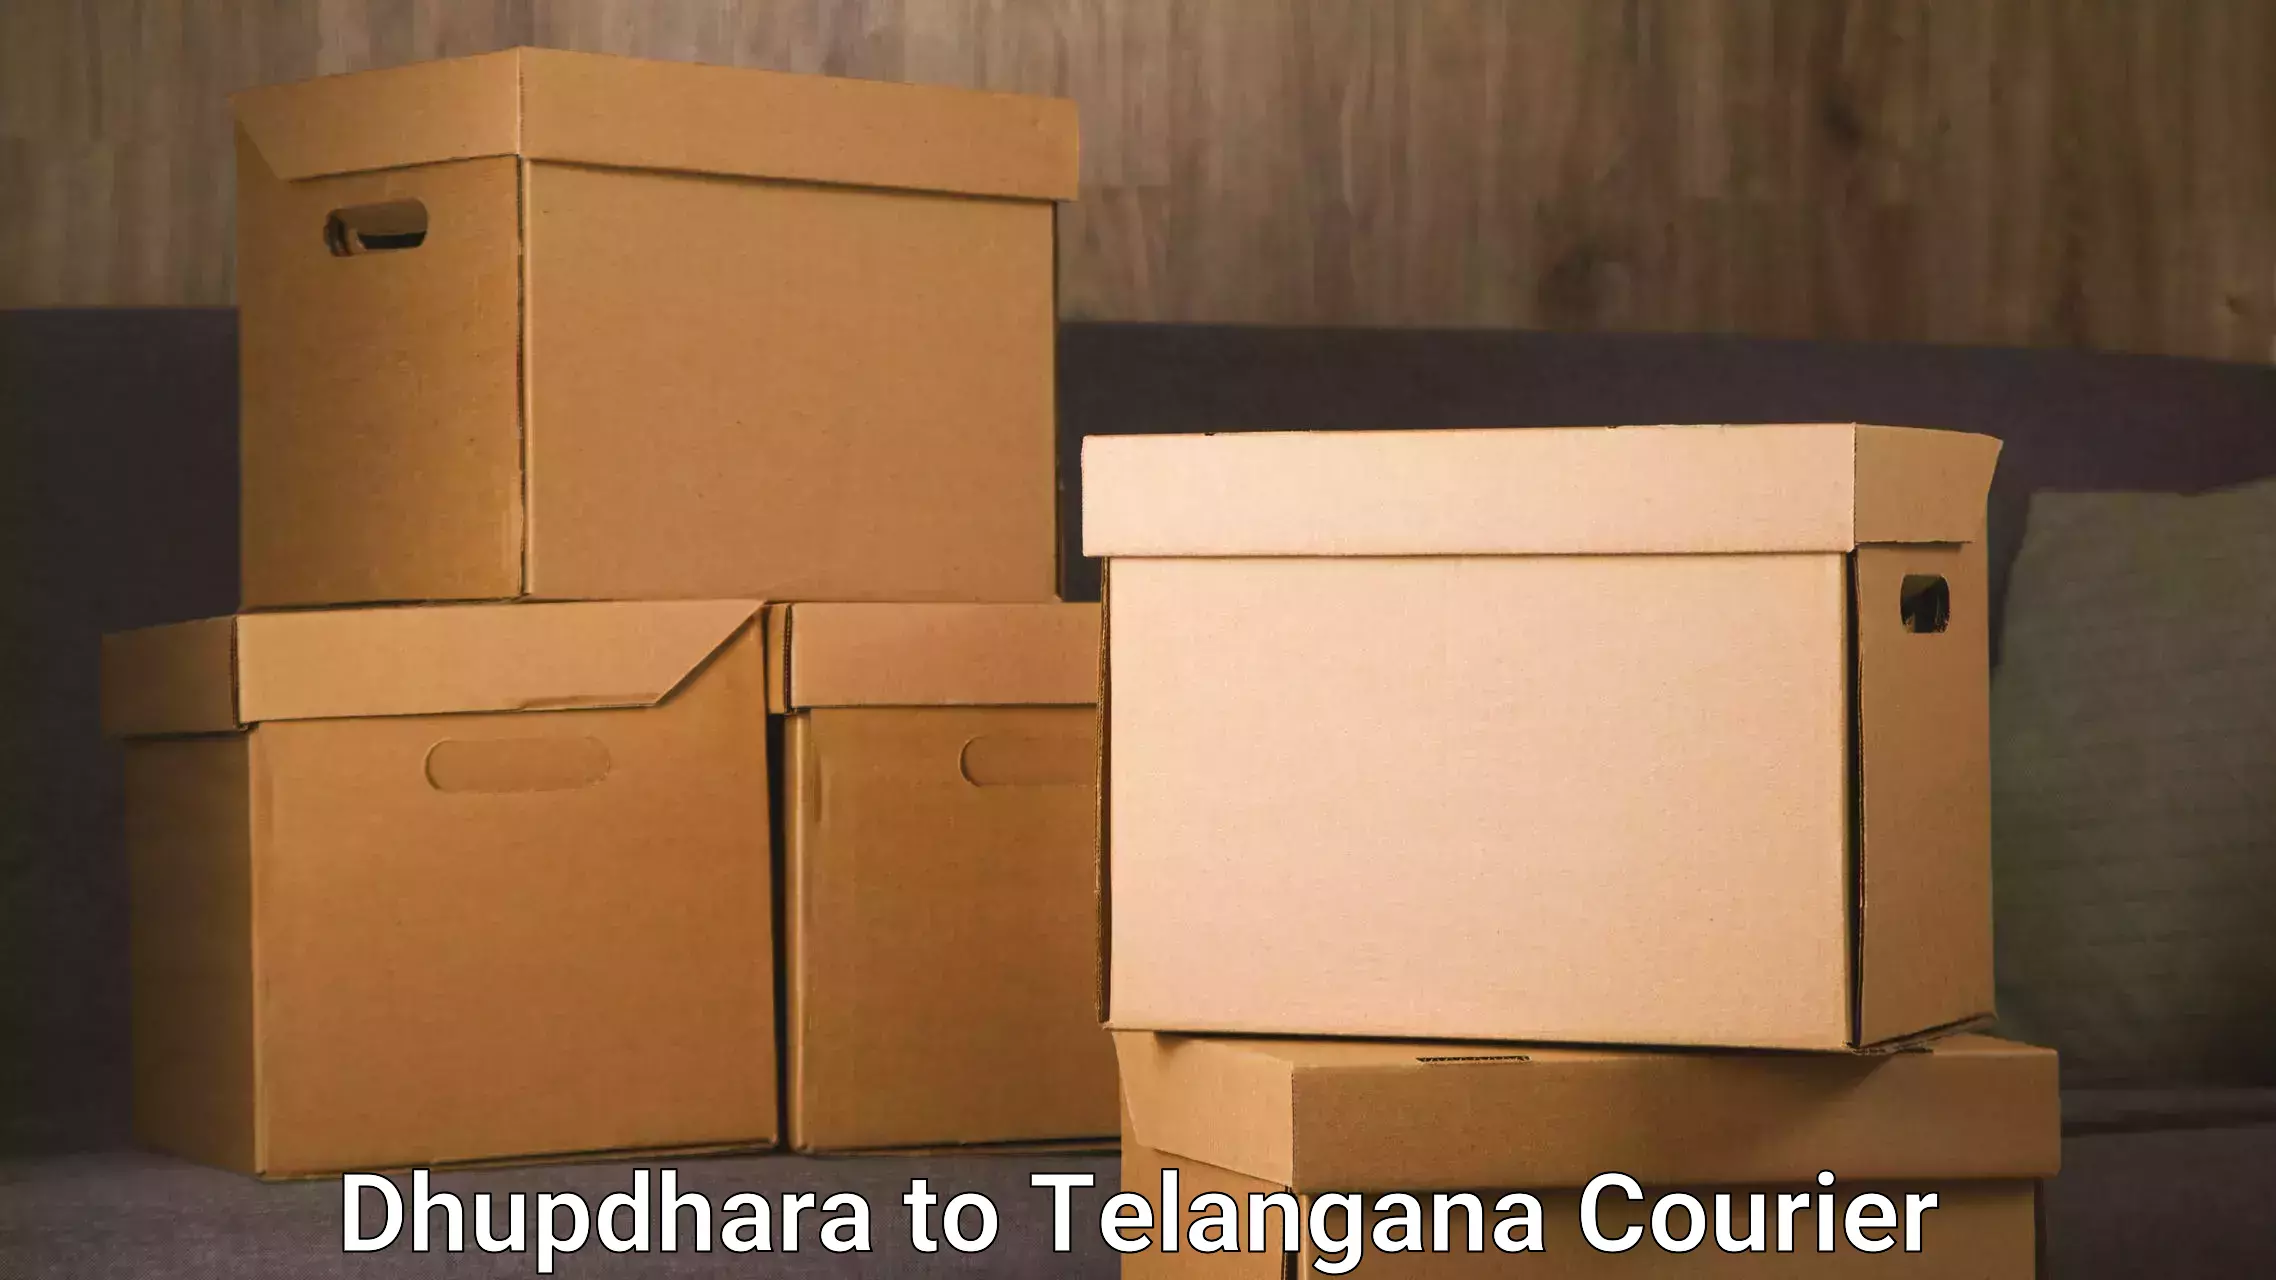 Courier service efficiency Dhupdhara to Thungathurthi